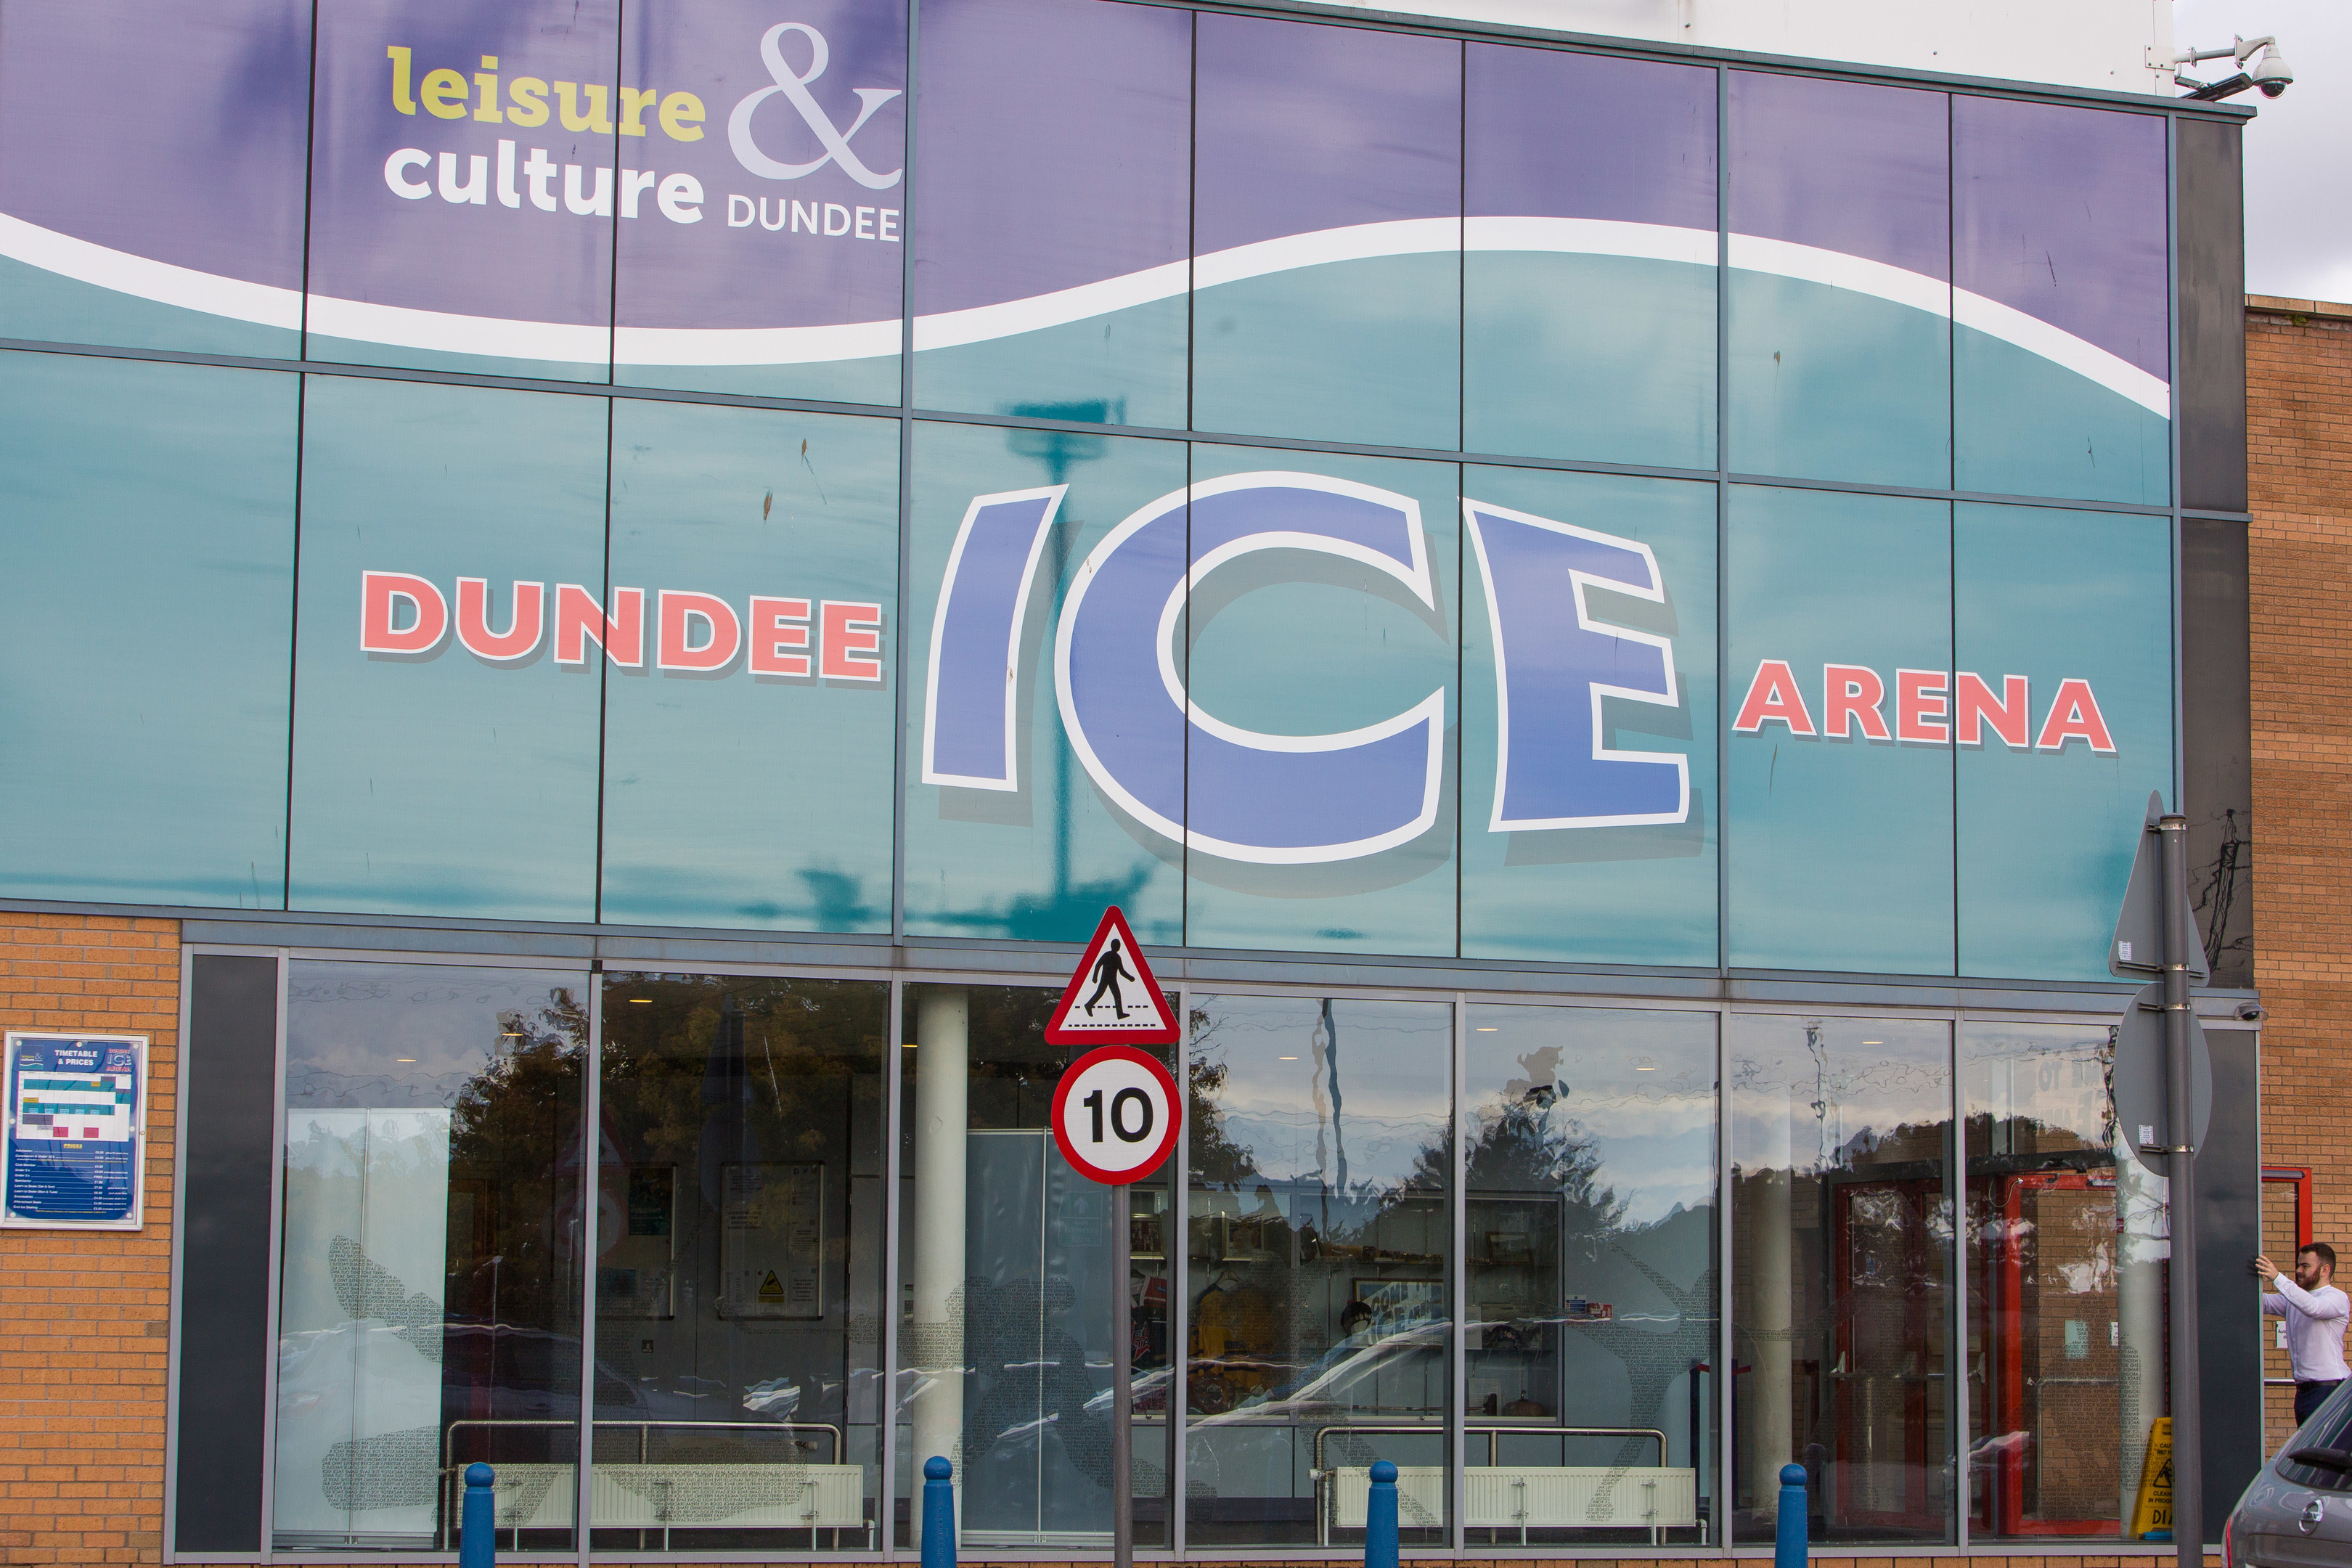 Dundee Ice Arena, home of the Dundee Stars.